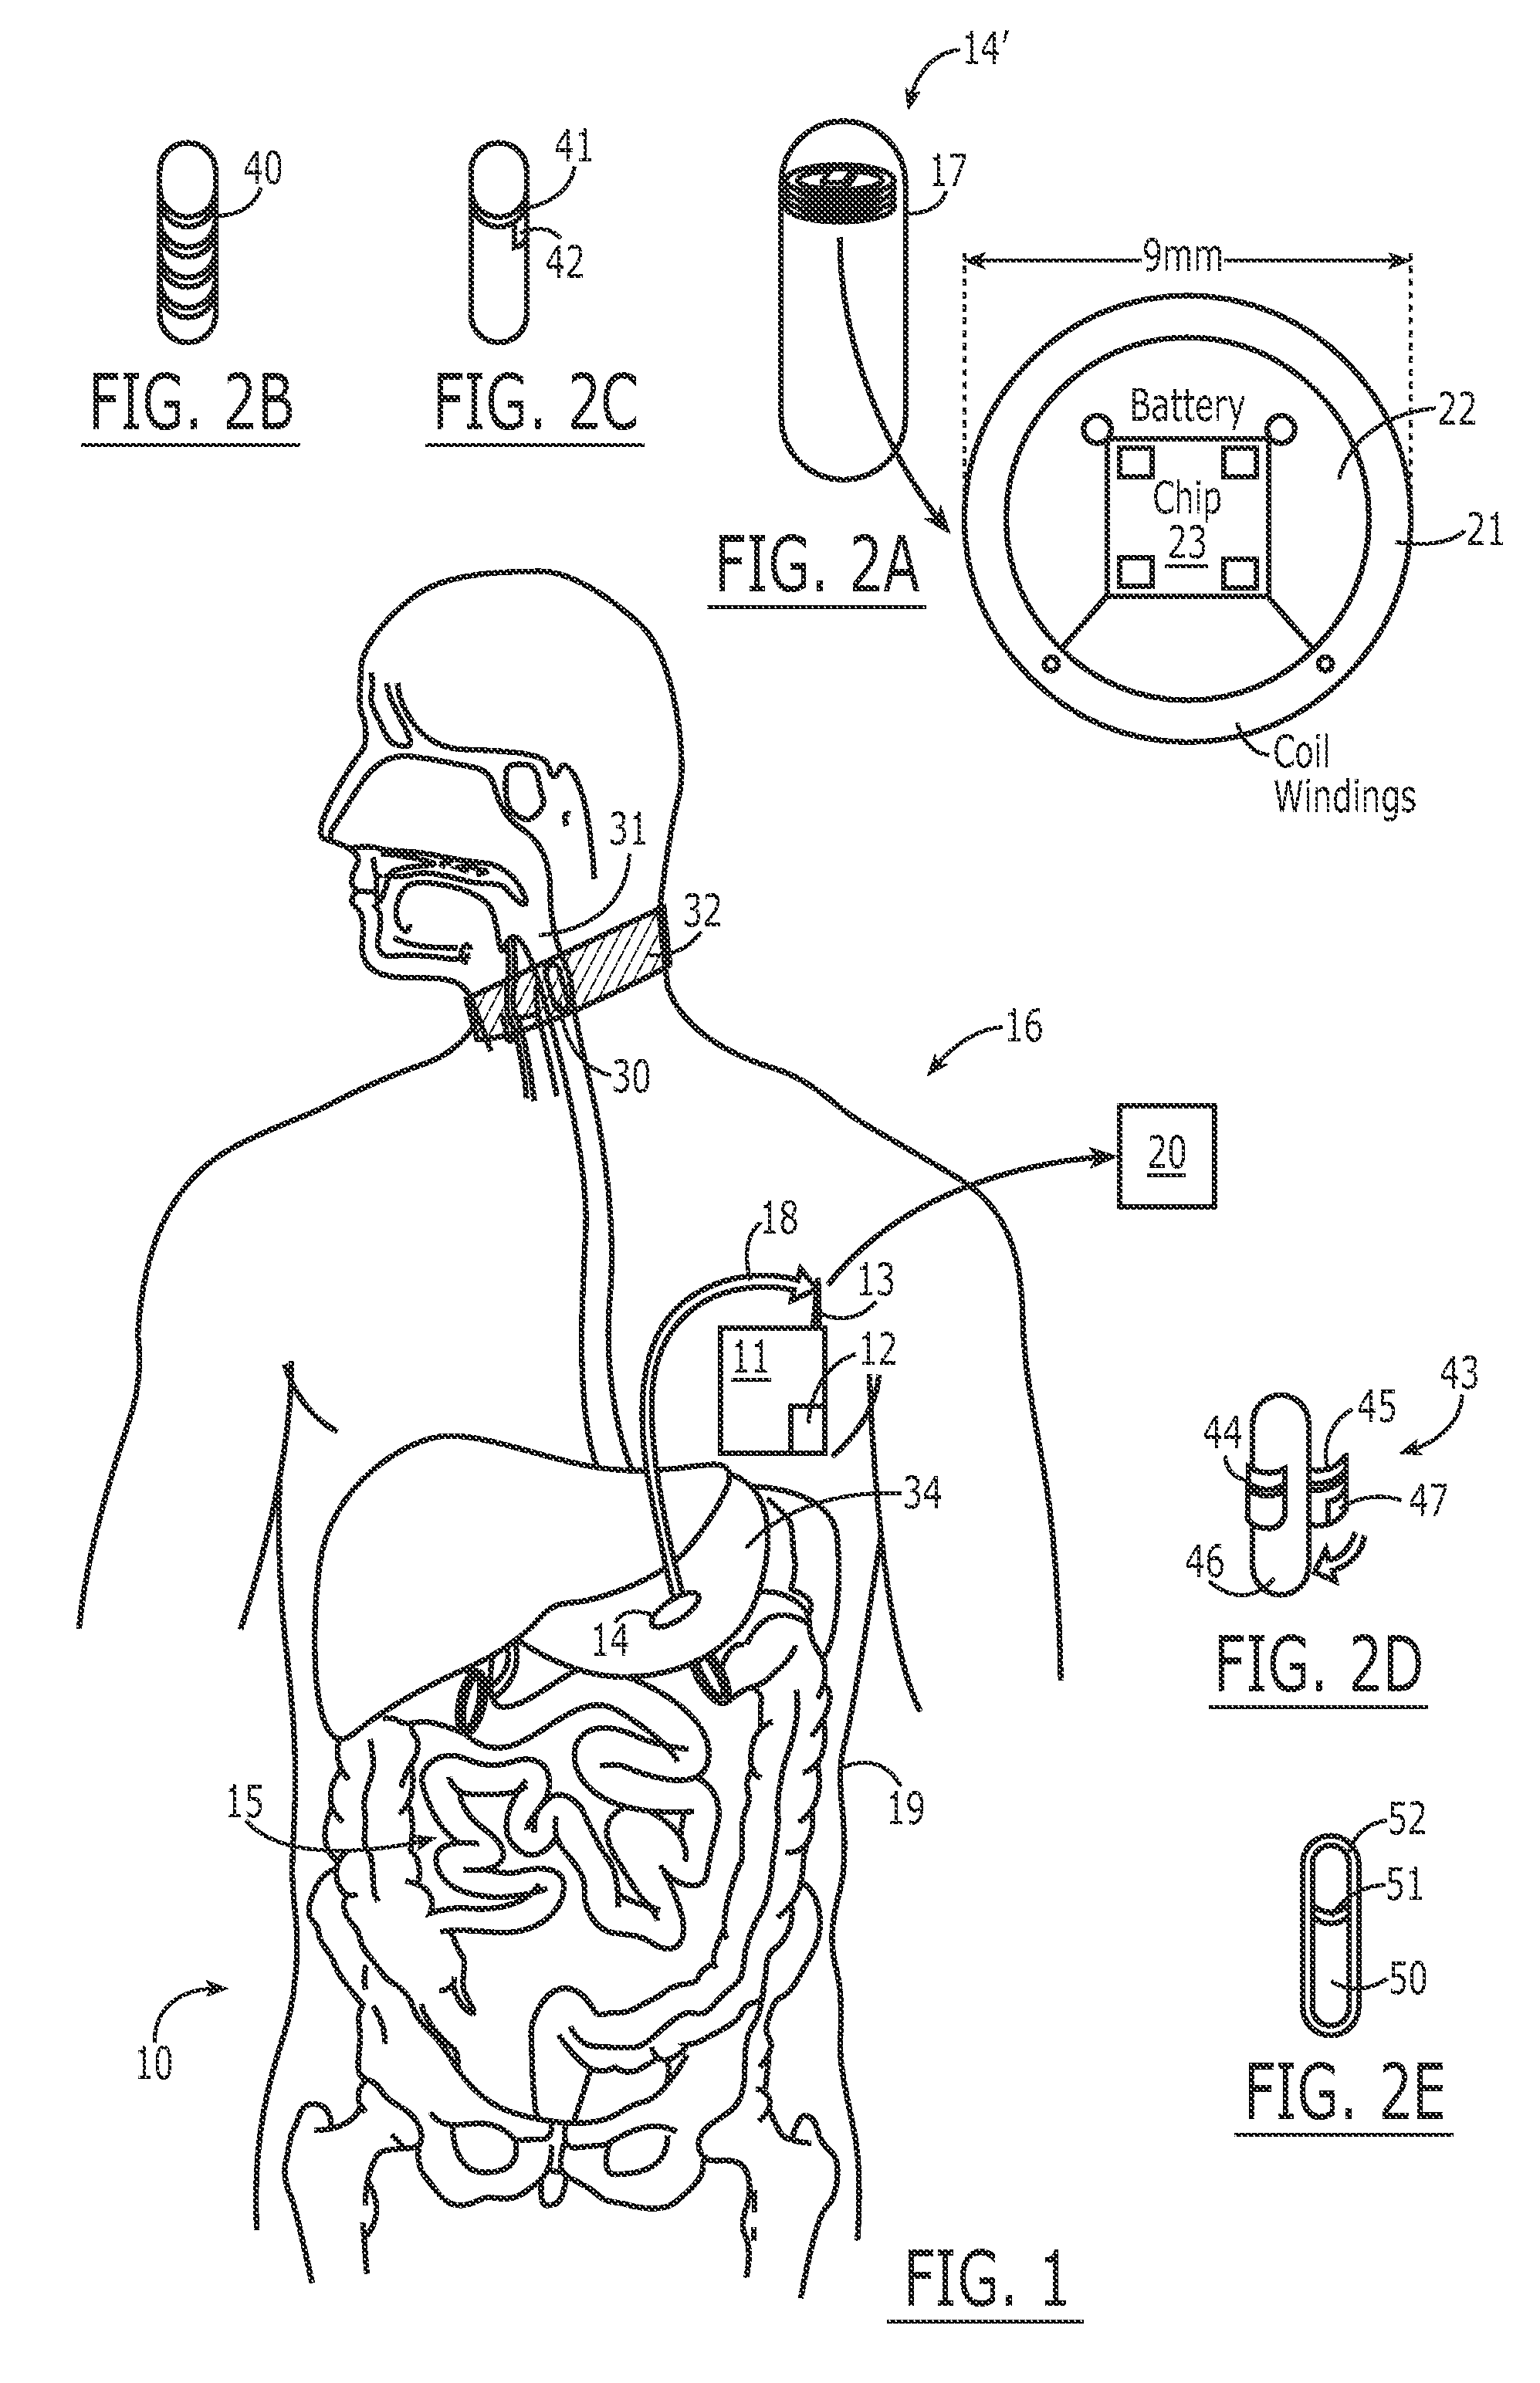 Medication compliance system and associated methods